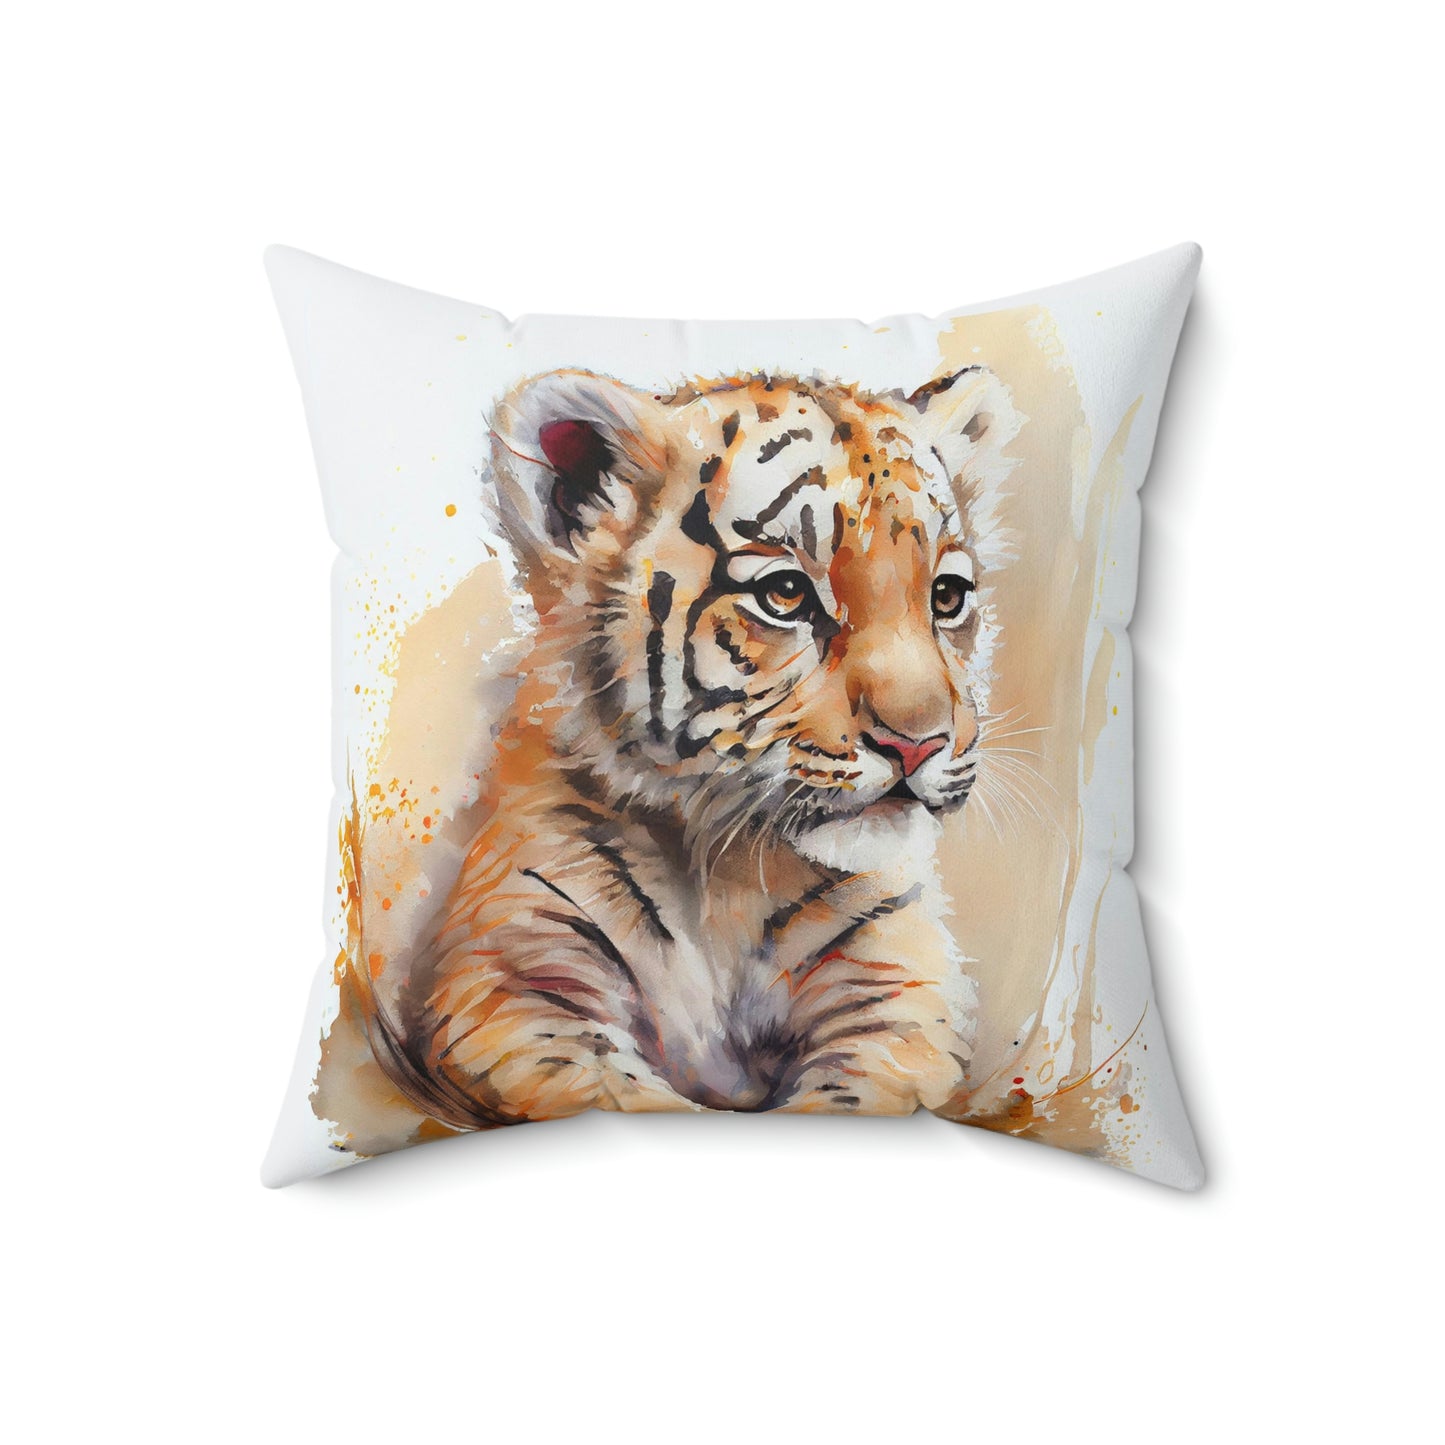 yellow and orange tiger cub design on an accent throw pillow, tiger theme throw pillow on a couch that has a blue wall, decorate your room with an accent tiger pillow on a couch, chair or lounger